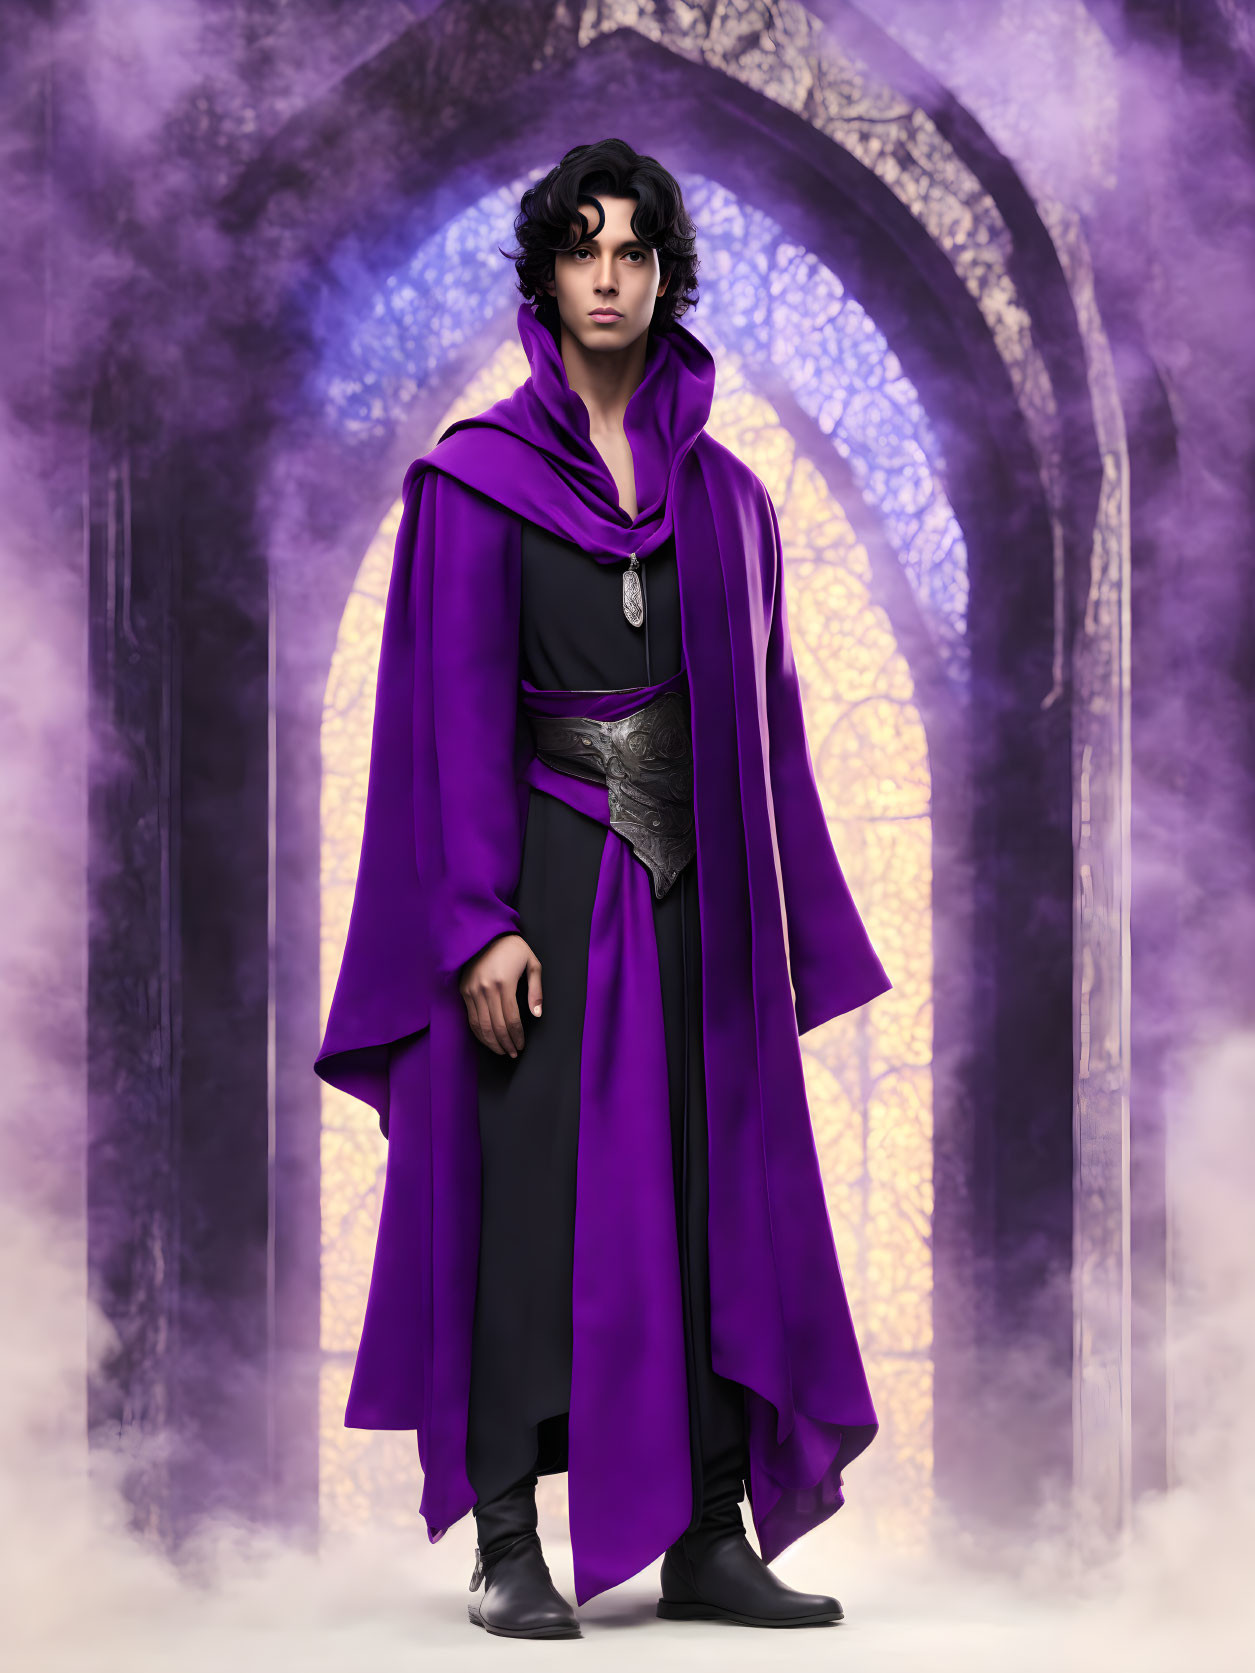 Person in purple cloak with stone archway and mystical fog background